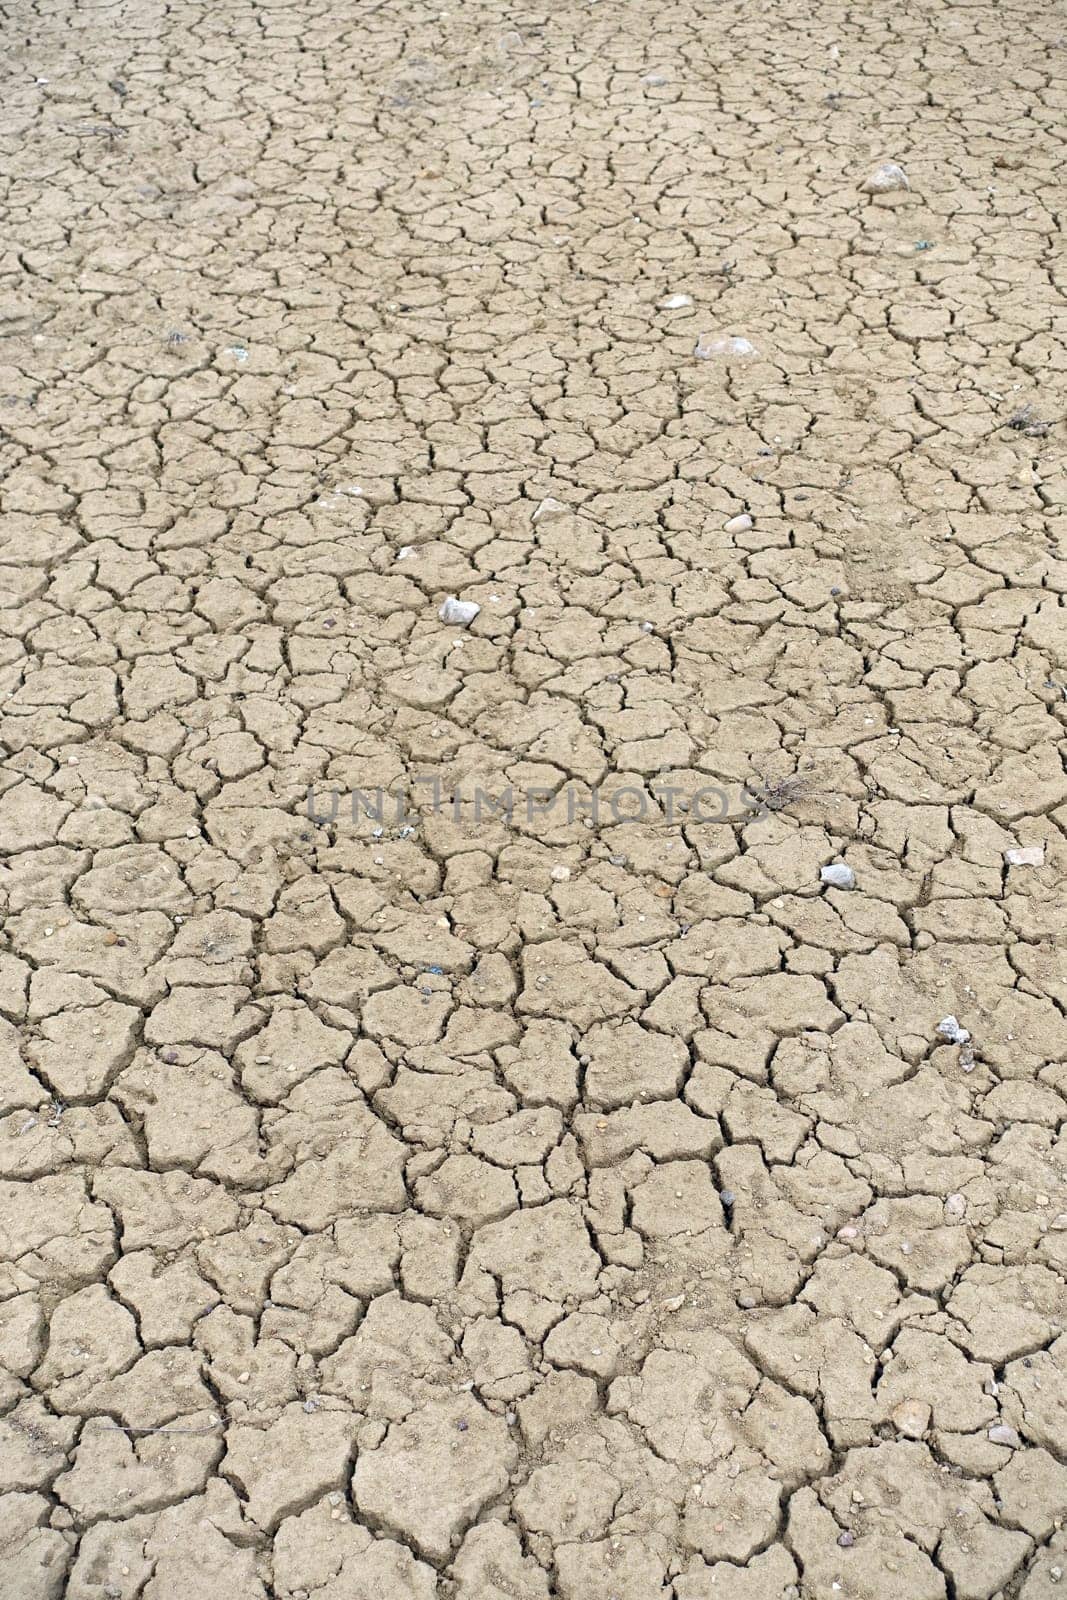 rapidly drying world-cracked and fissured soils-drought as a result of global warming, by nhatipoglu